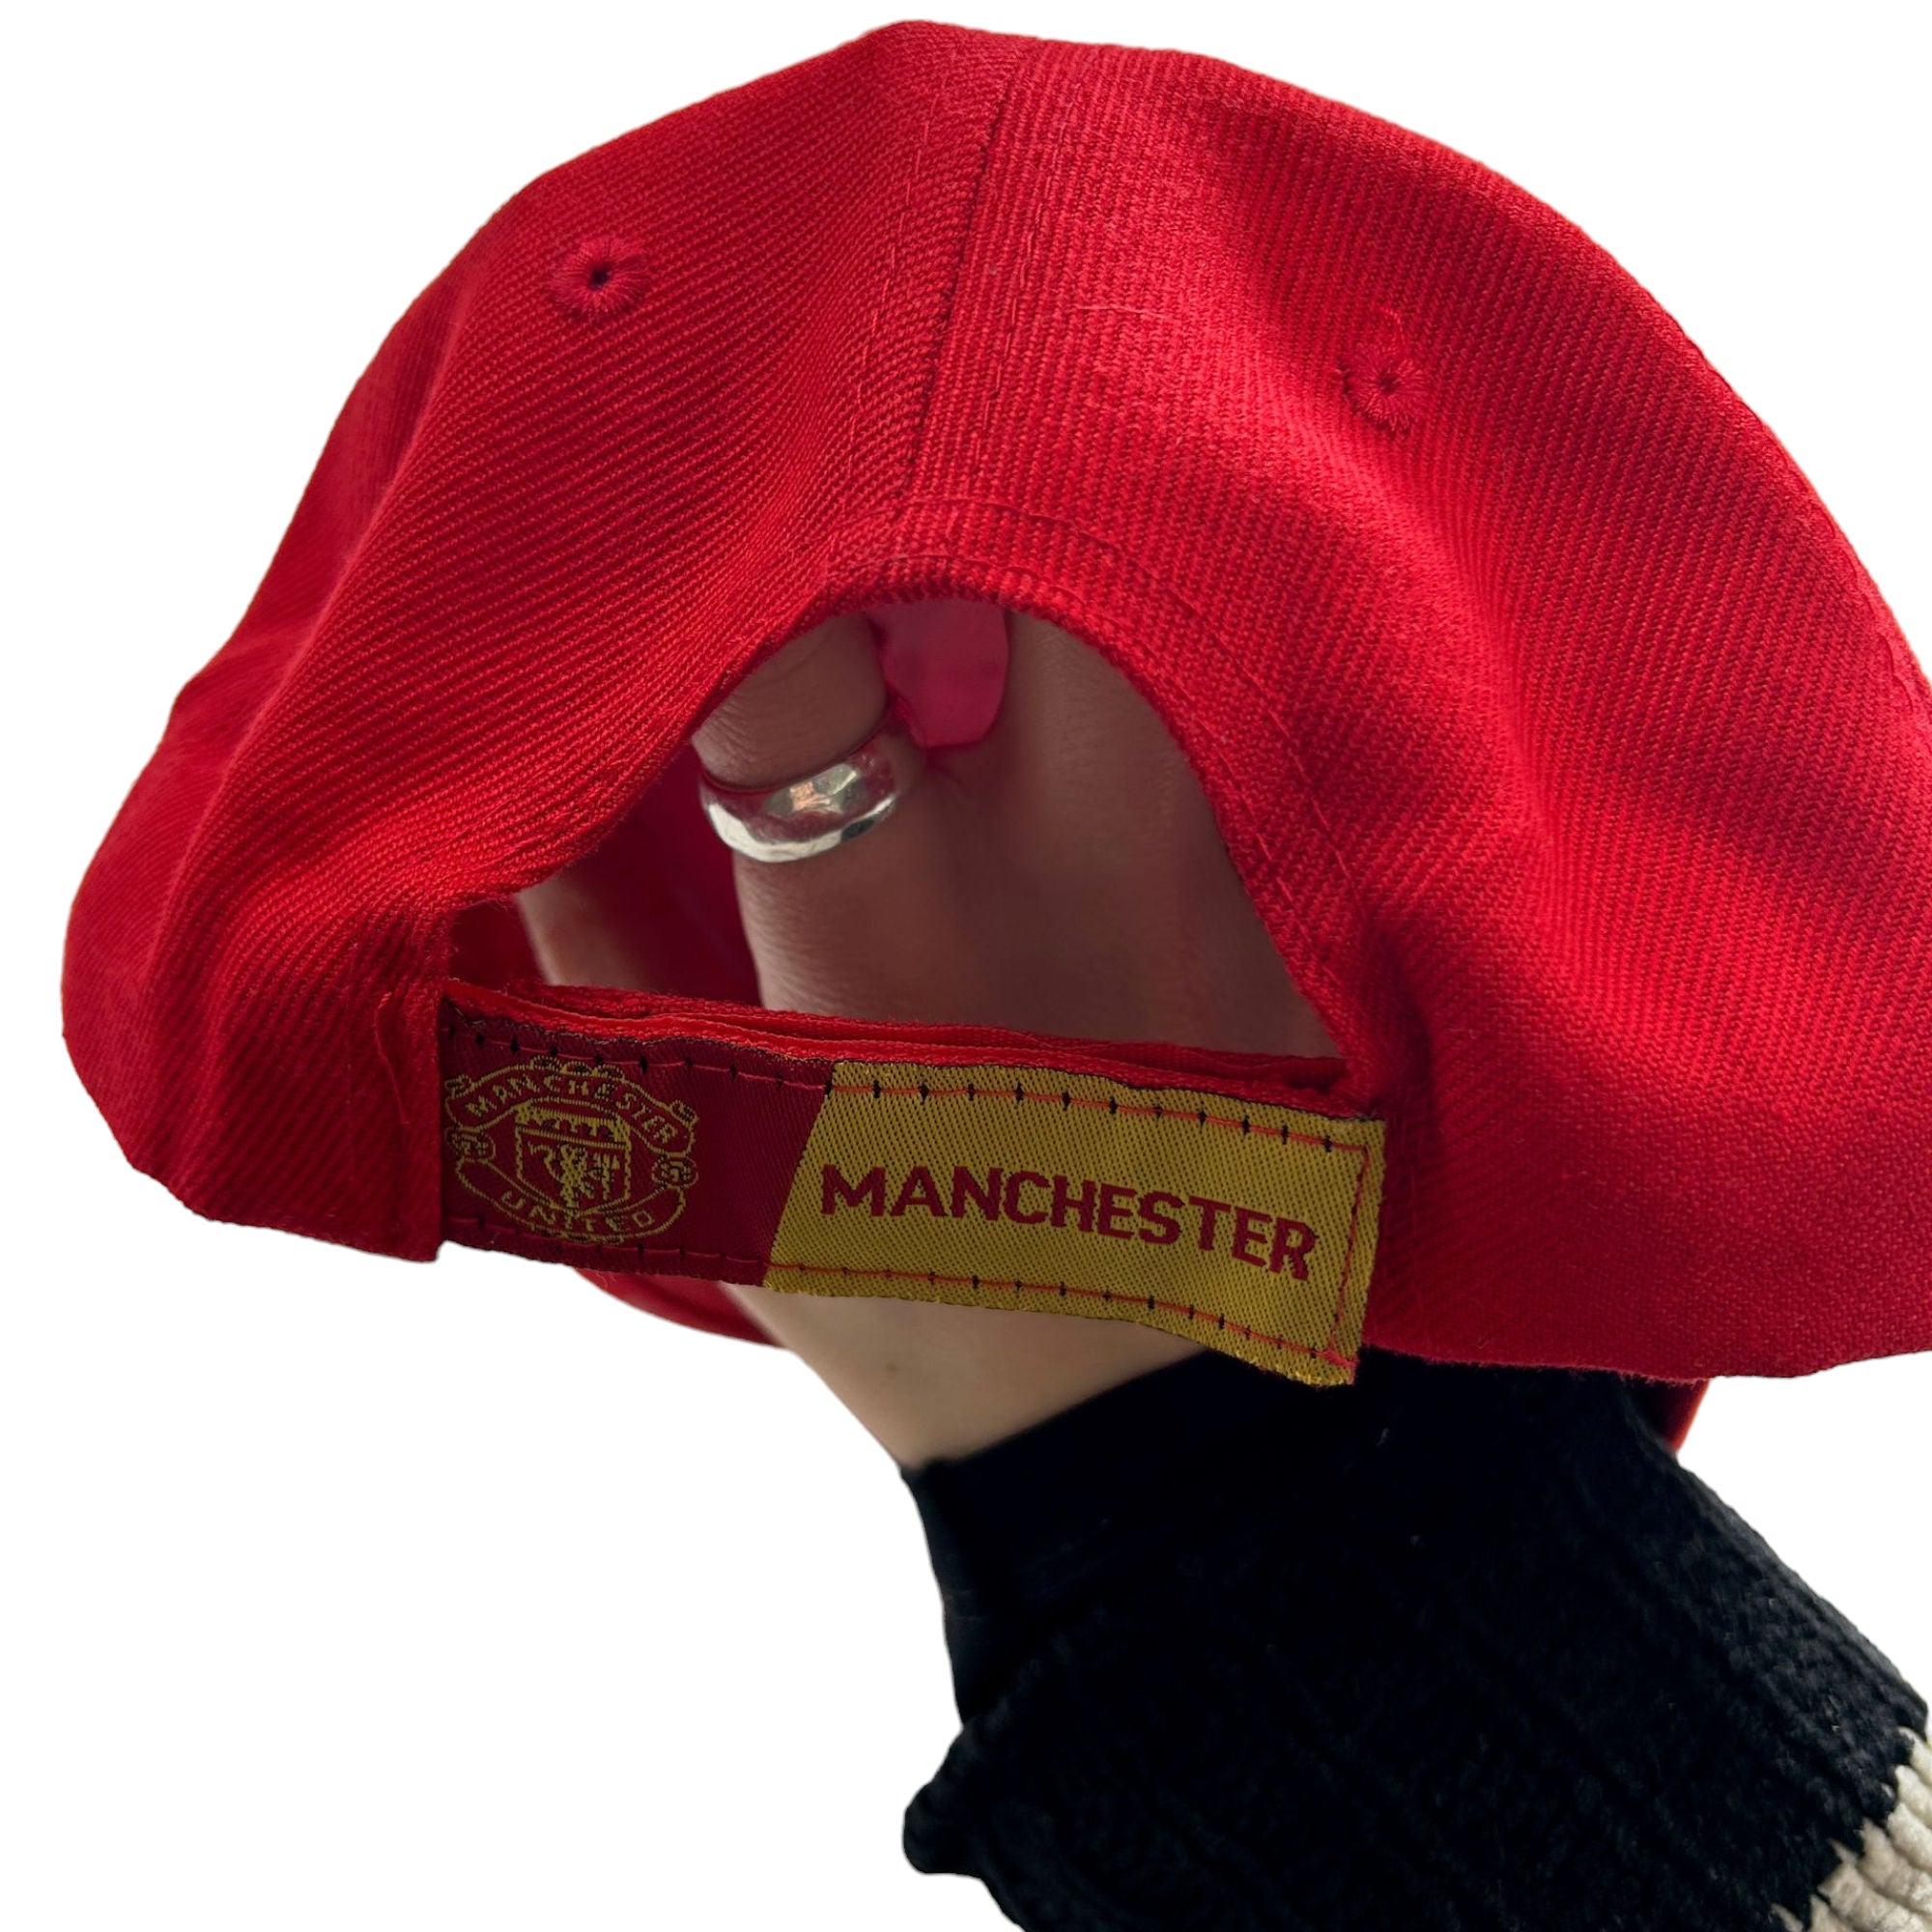 Nike Manchester United Cap Red Embroidered Cotton 00s Streetwear 